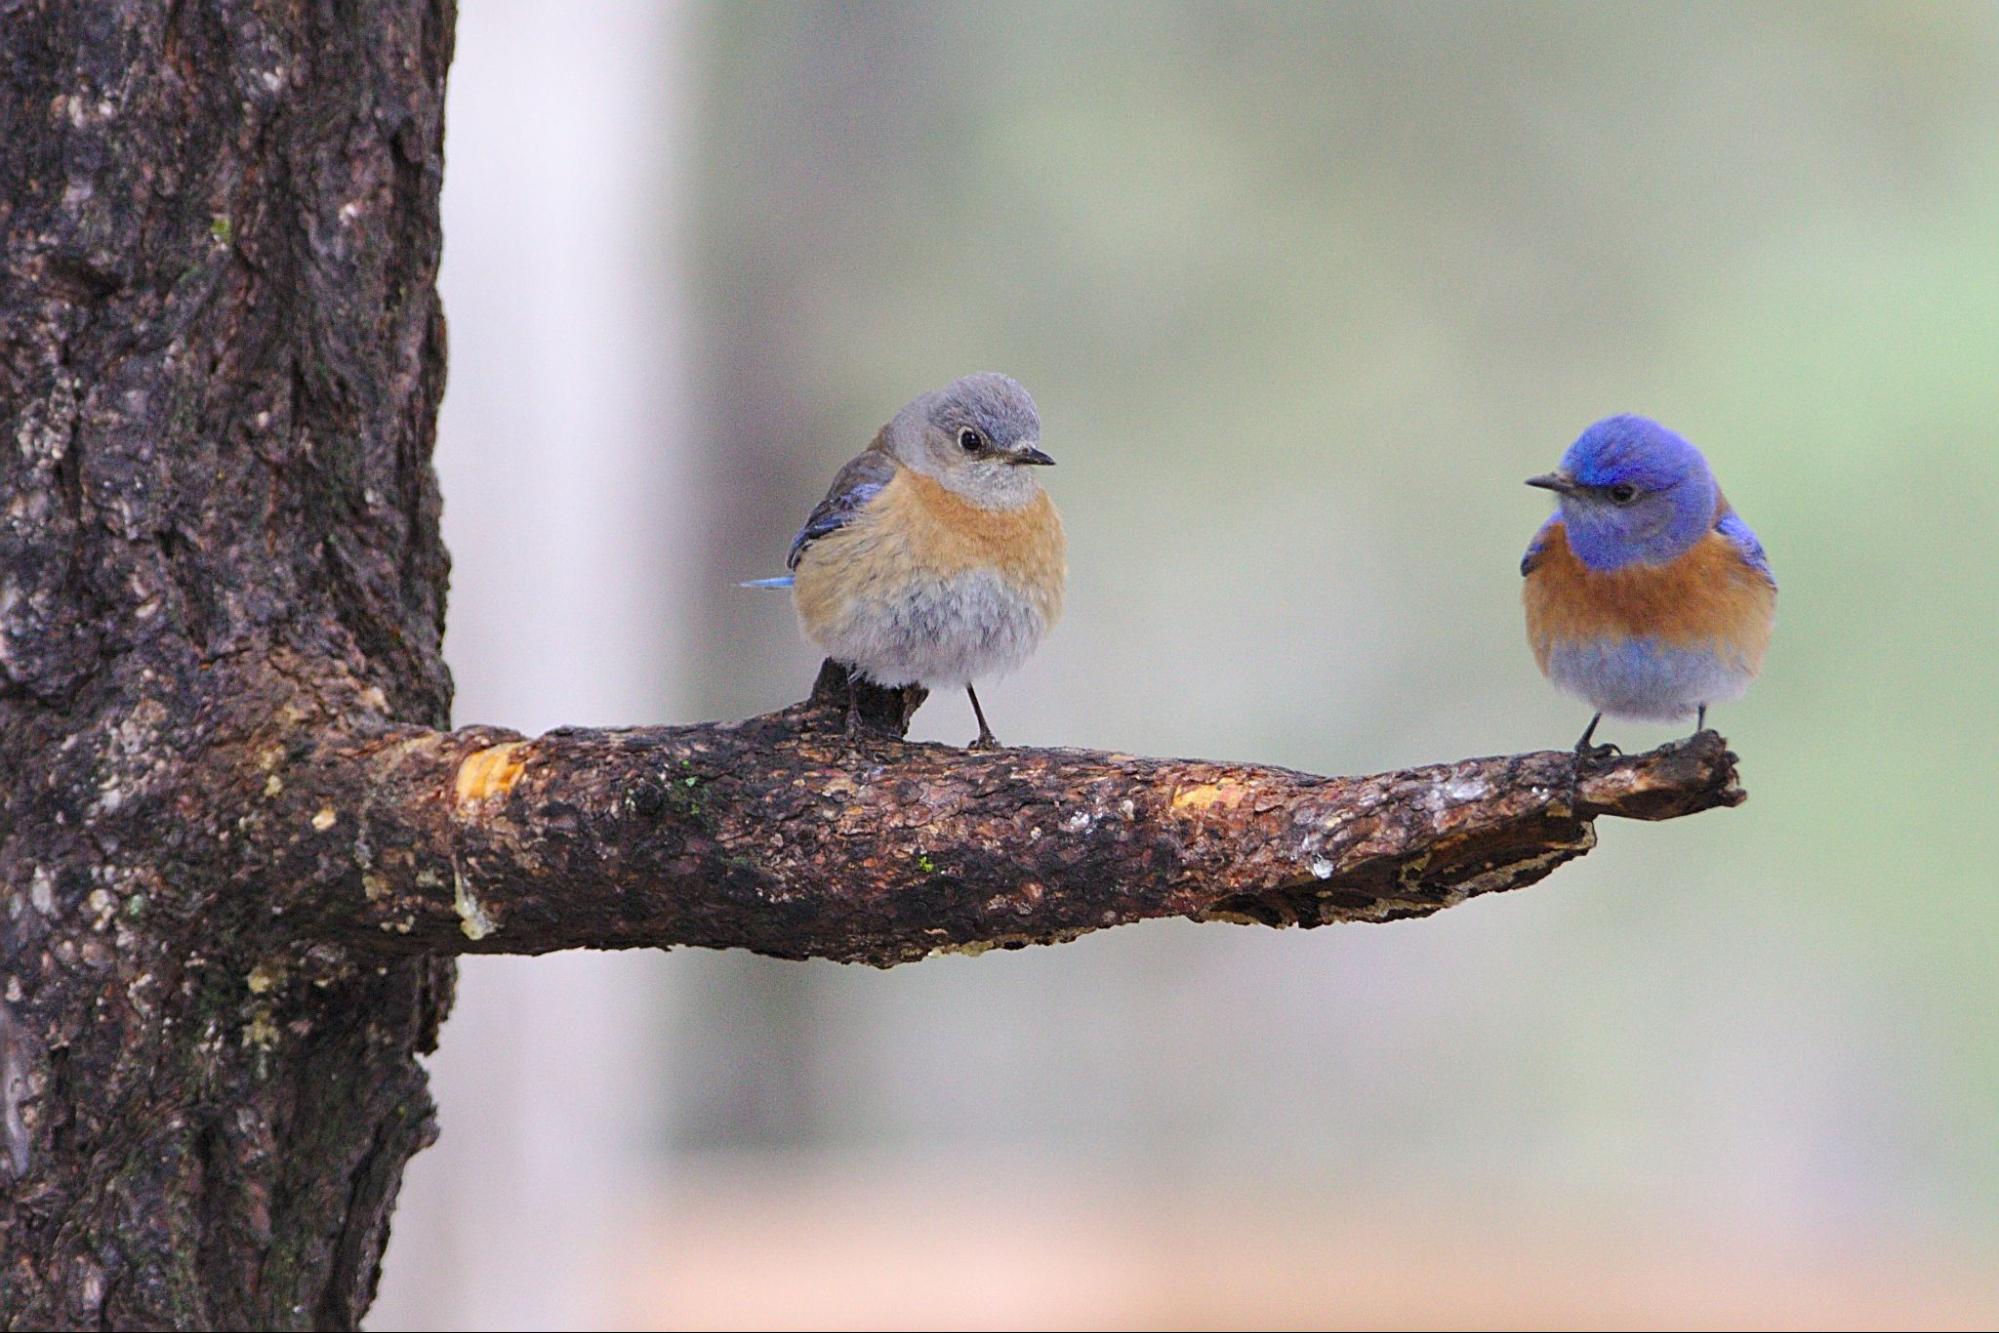 Two small birds sitting on a tree branch